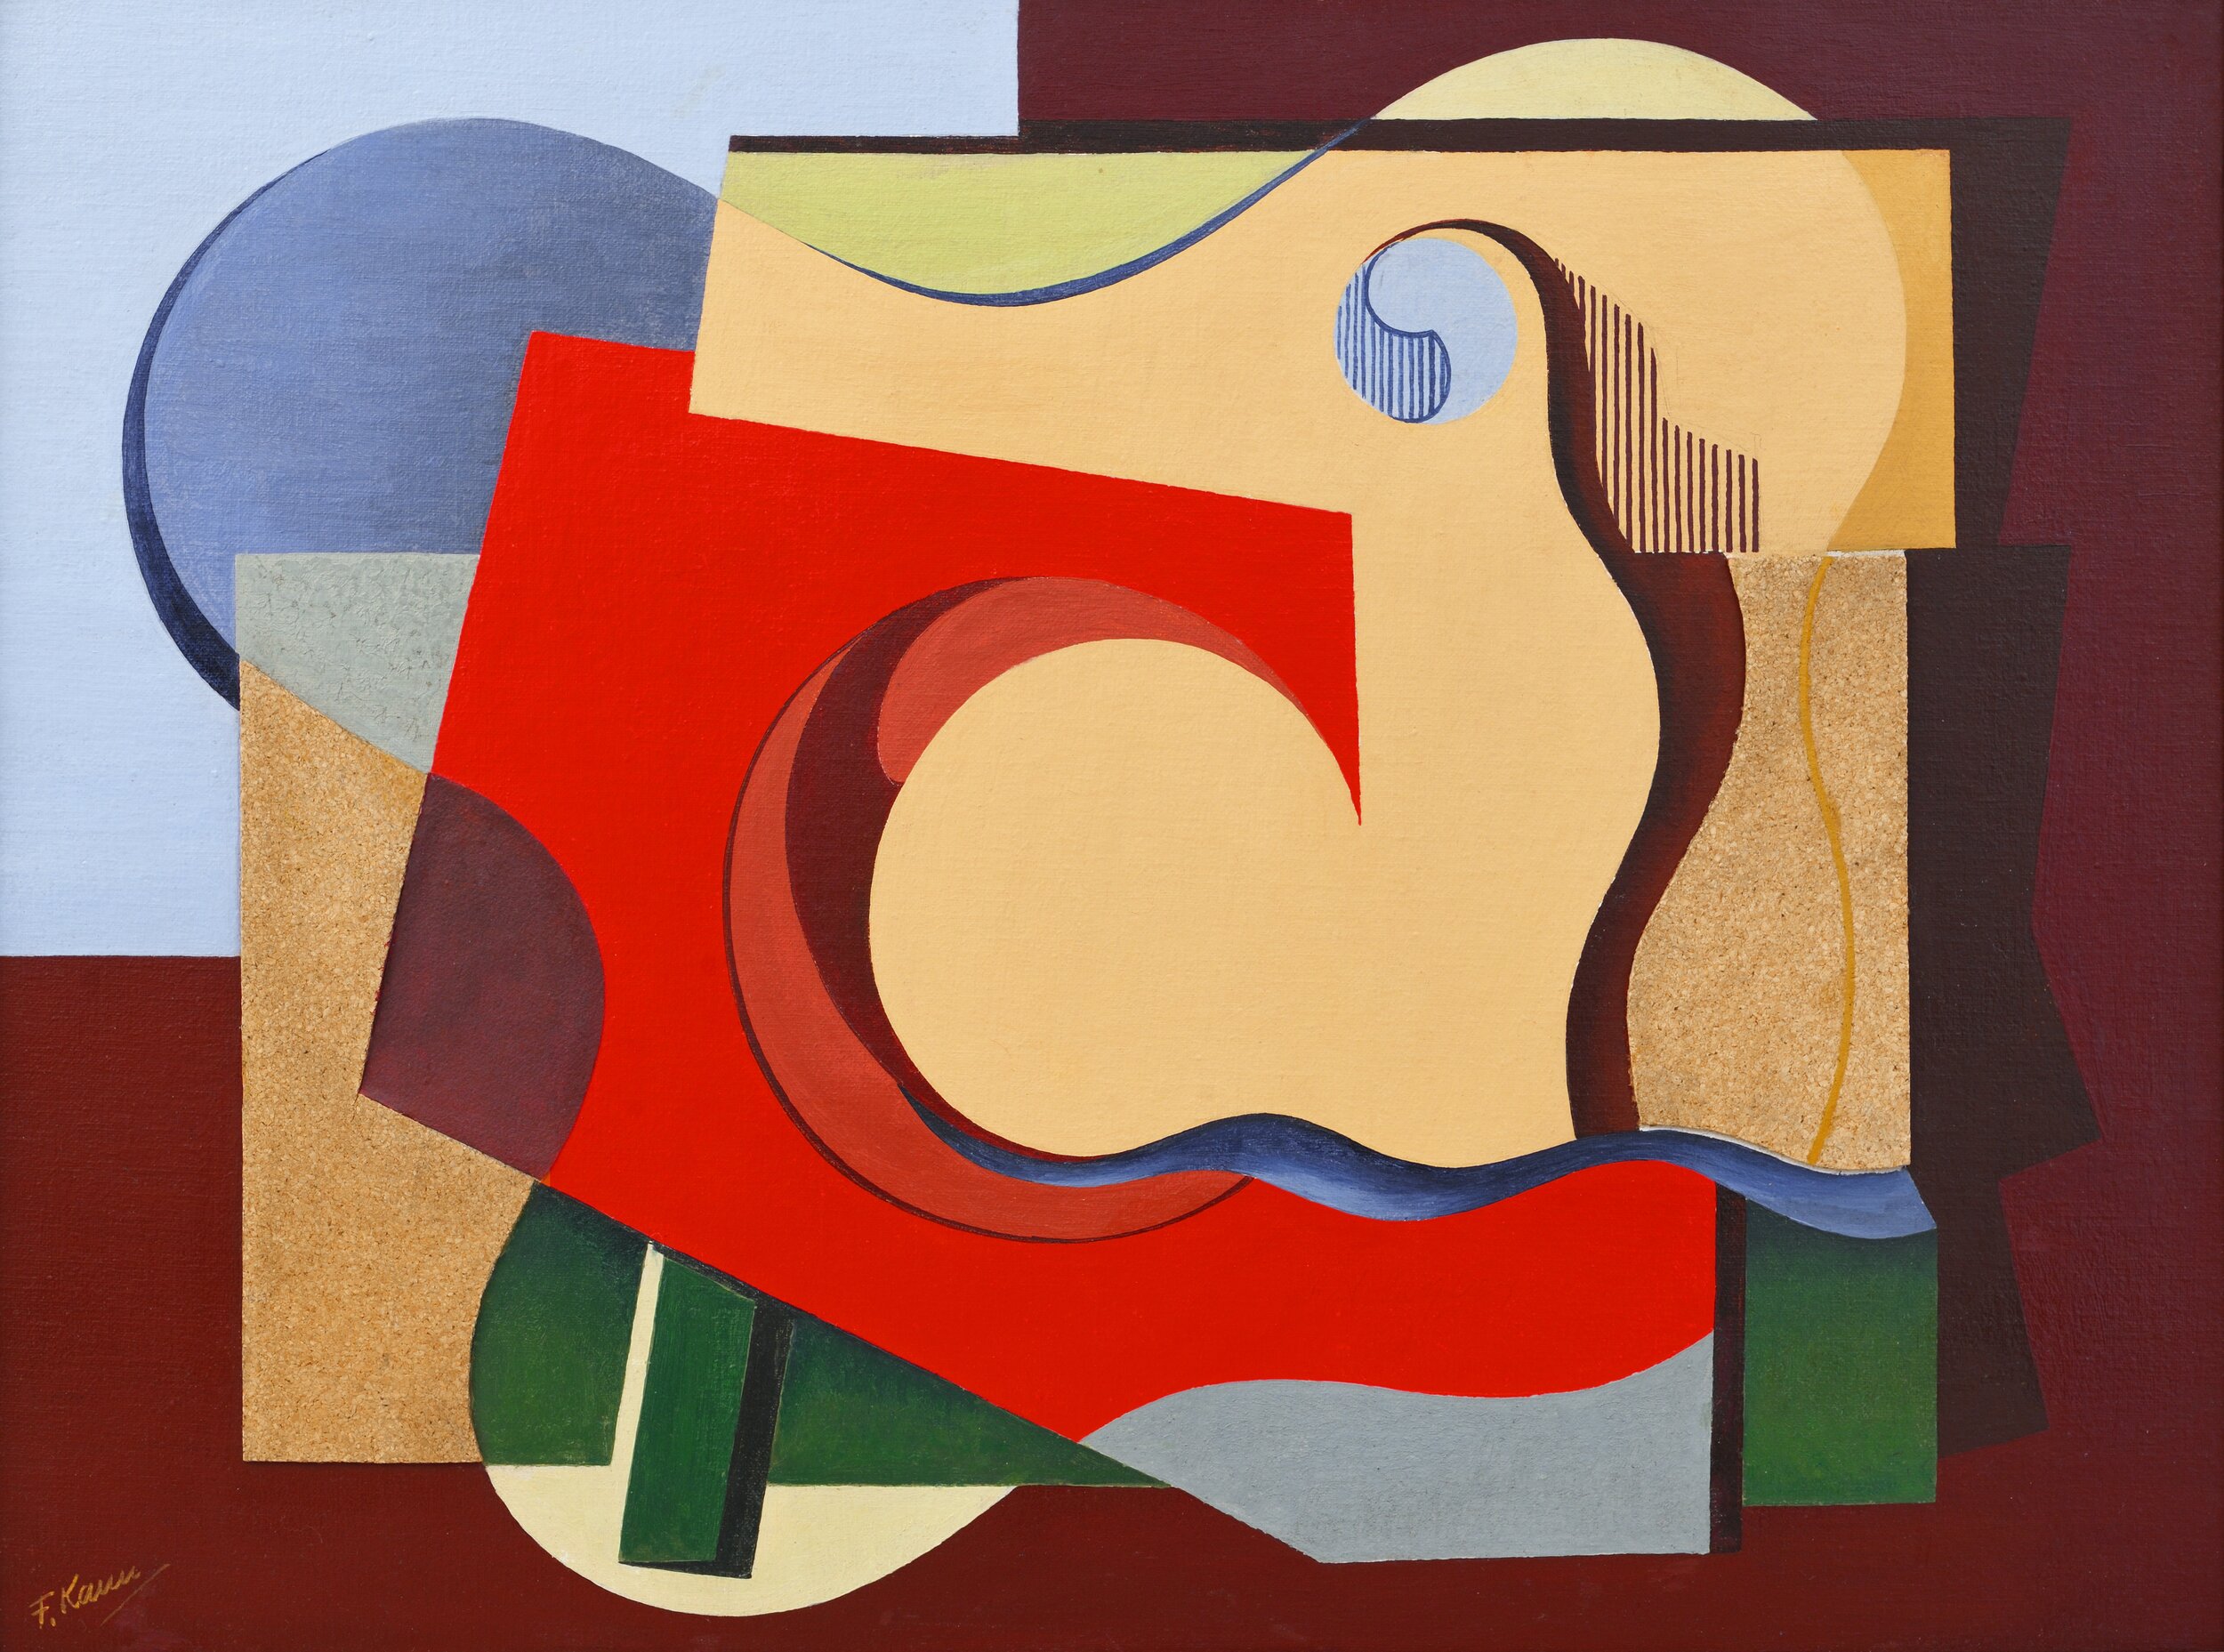 Material Biederman &lt;alt: Geometric abstract painting of different colored flat planes and cork relief in primarily yellow, red, blue, and brown &lt;/&gt;